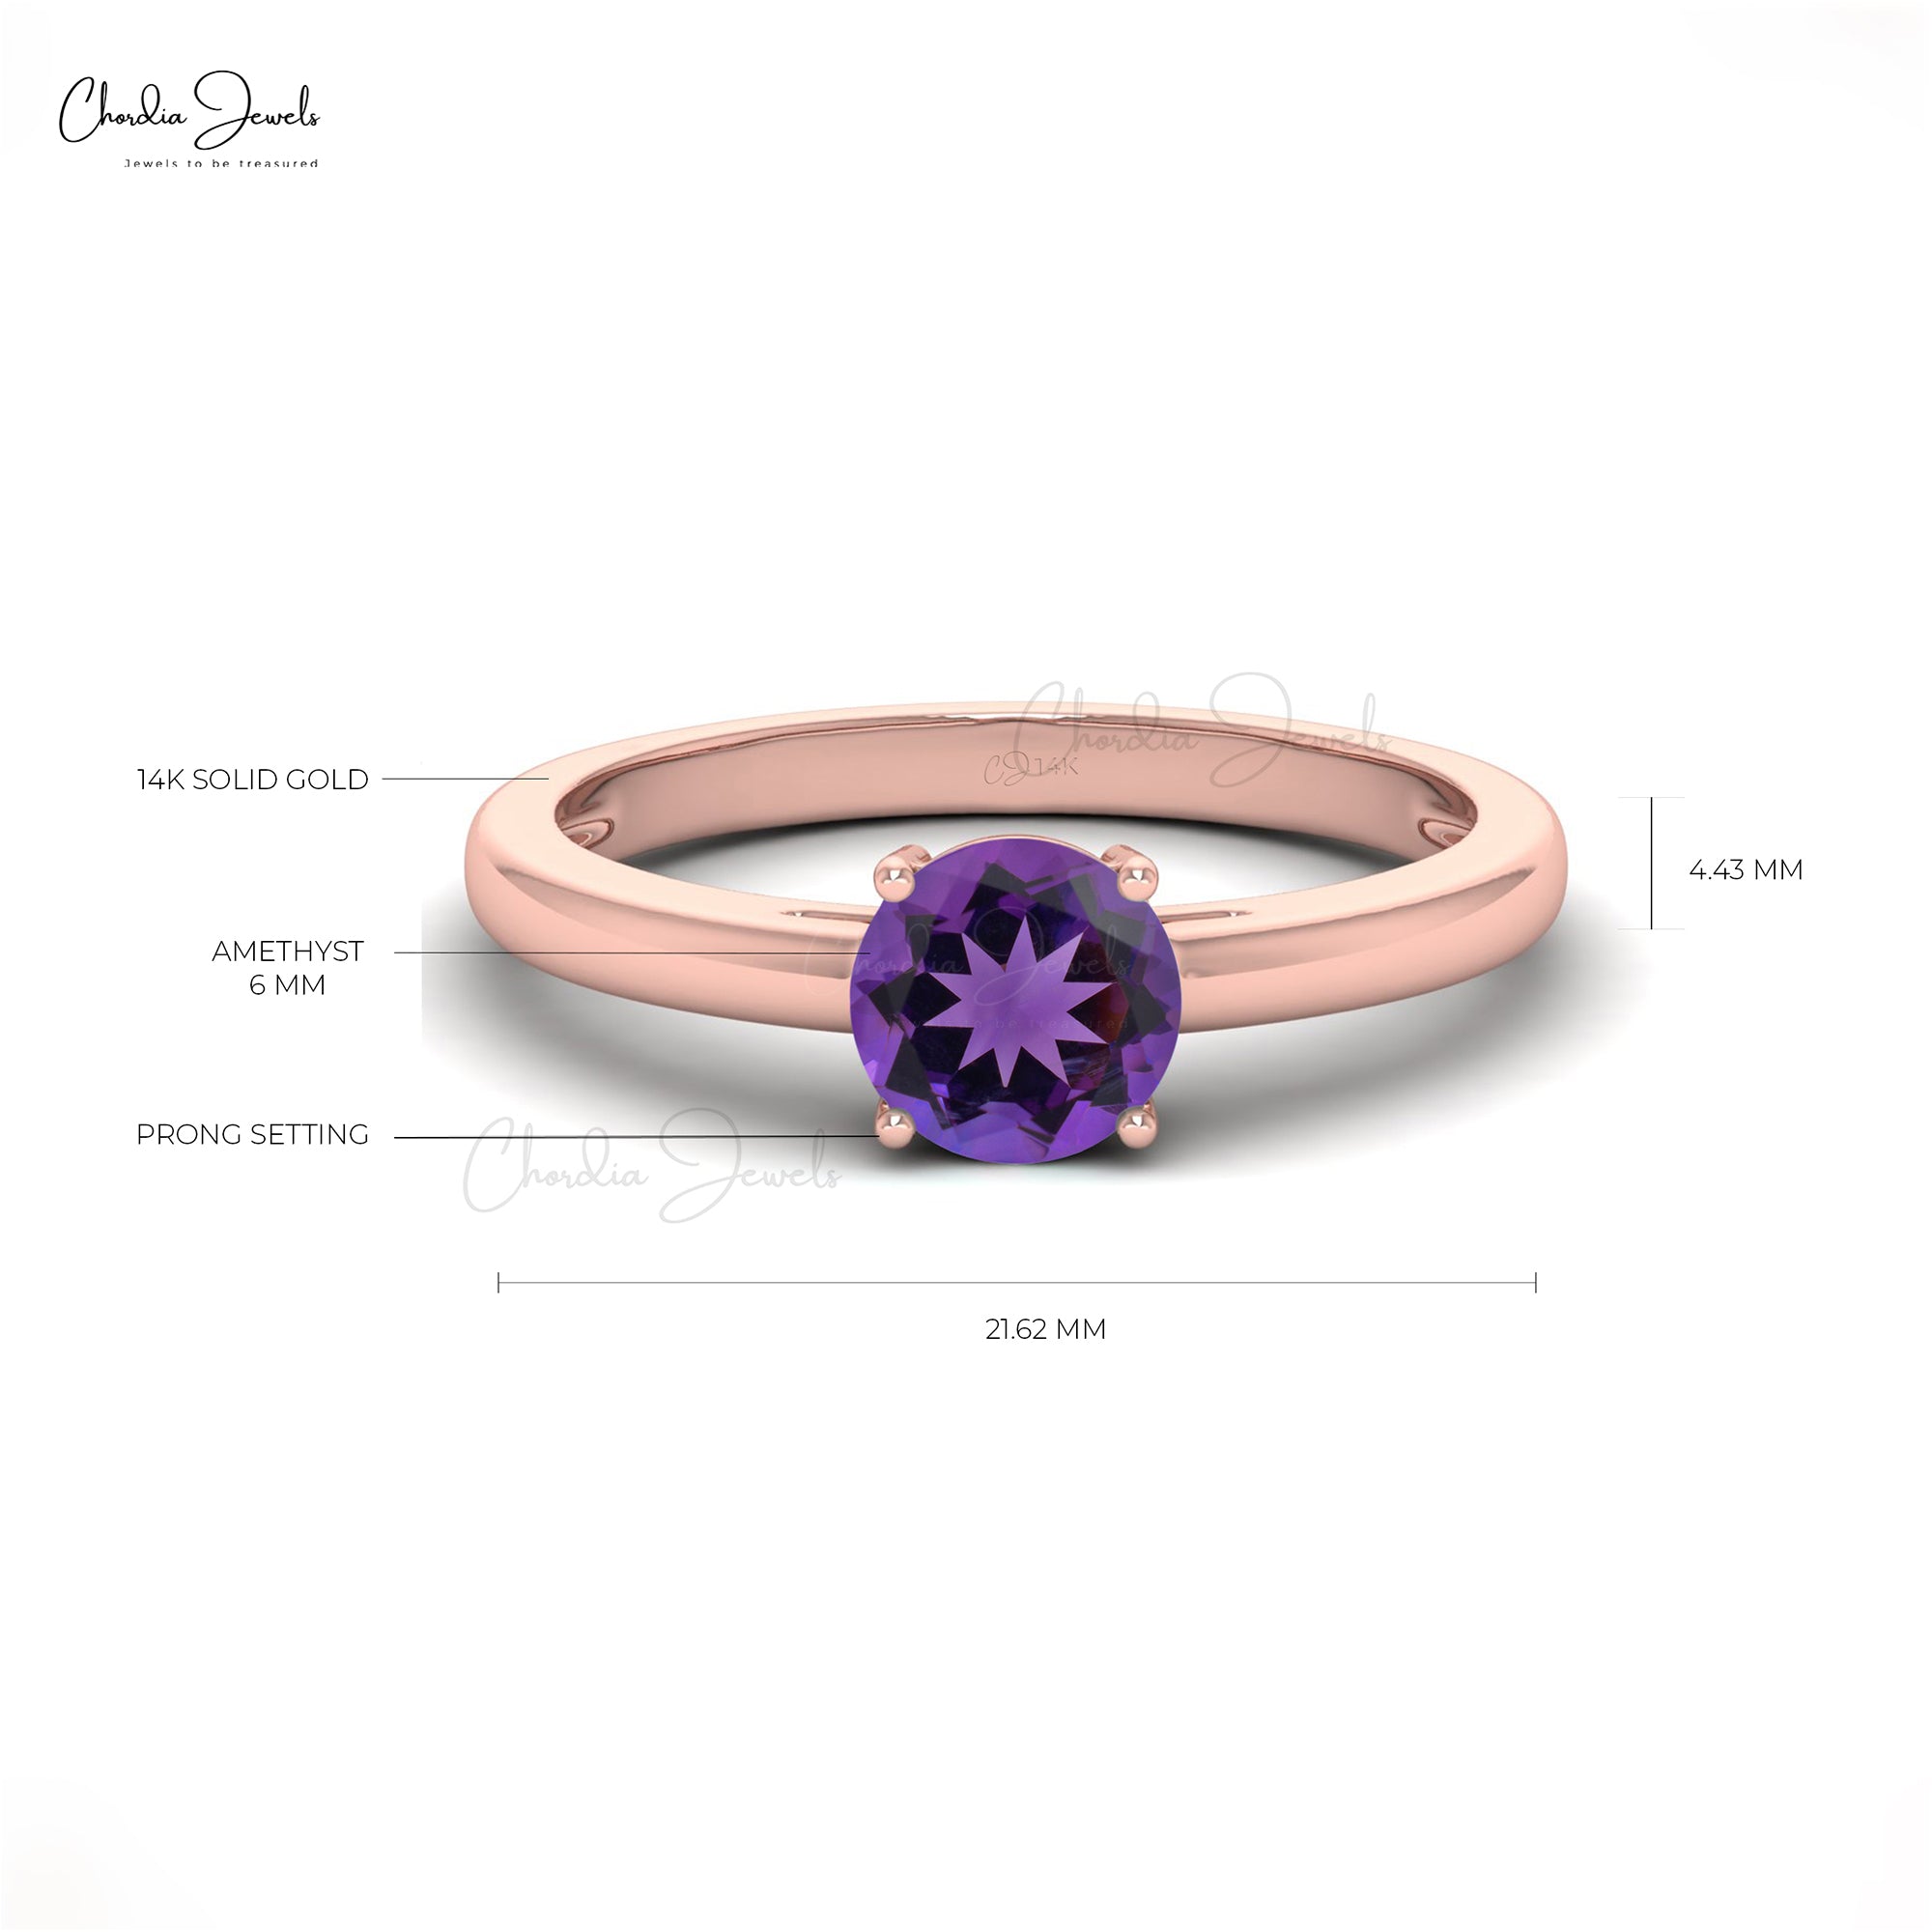 Antique rose gold amethyst and diamond ring